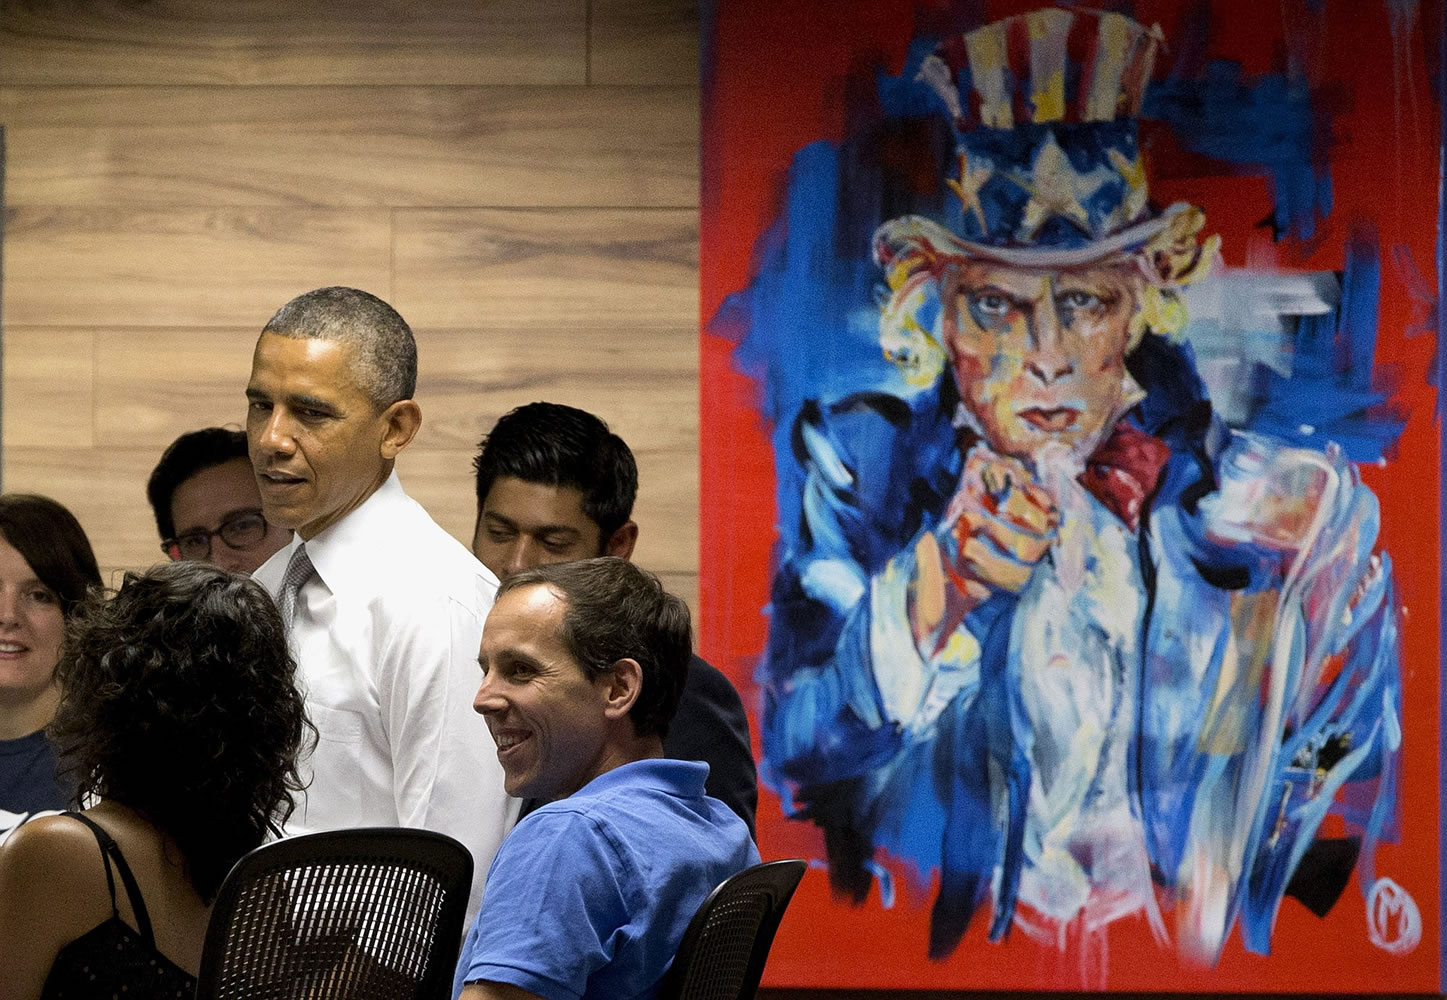 President Barack Obama stands next to a painting of Uncle Sam during a Thursday visit with workers at 1776, a hub for tech startups, in Washington.